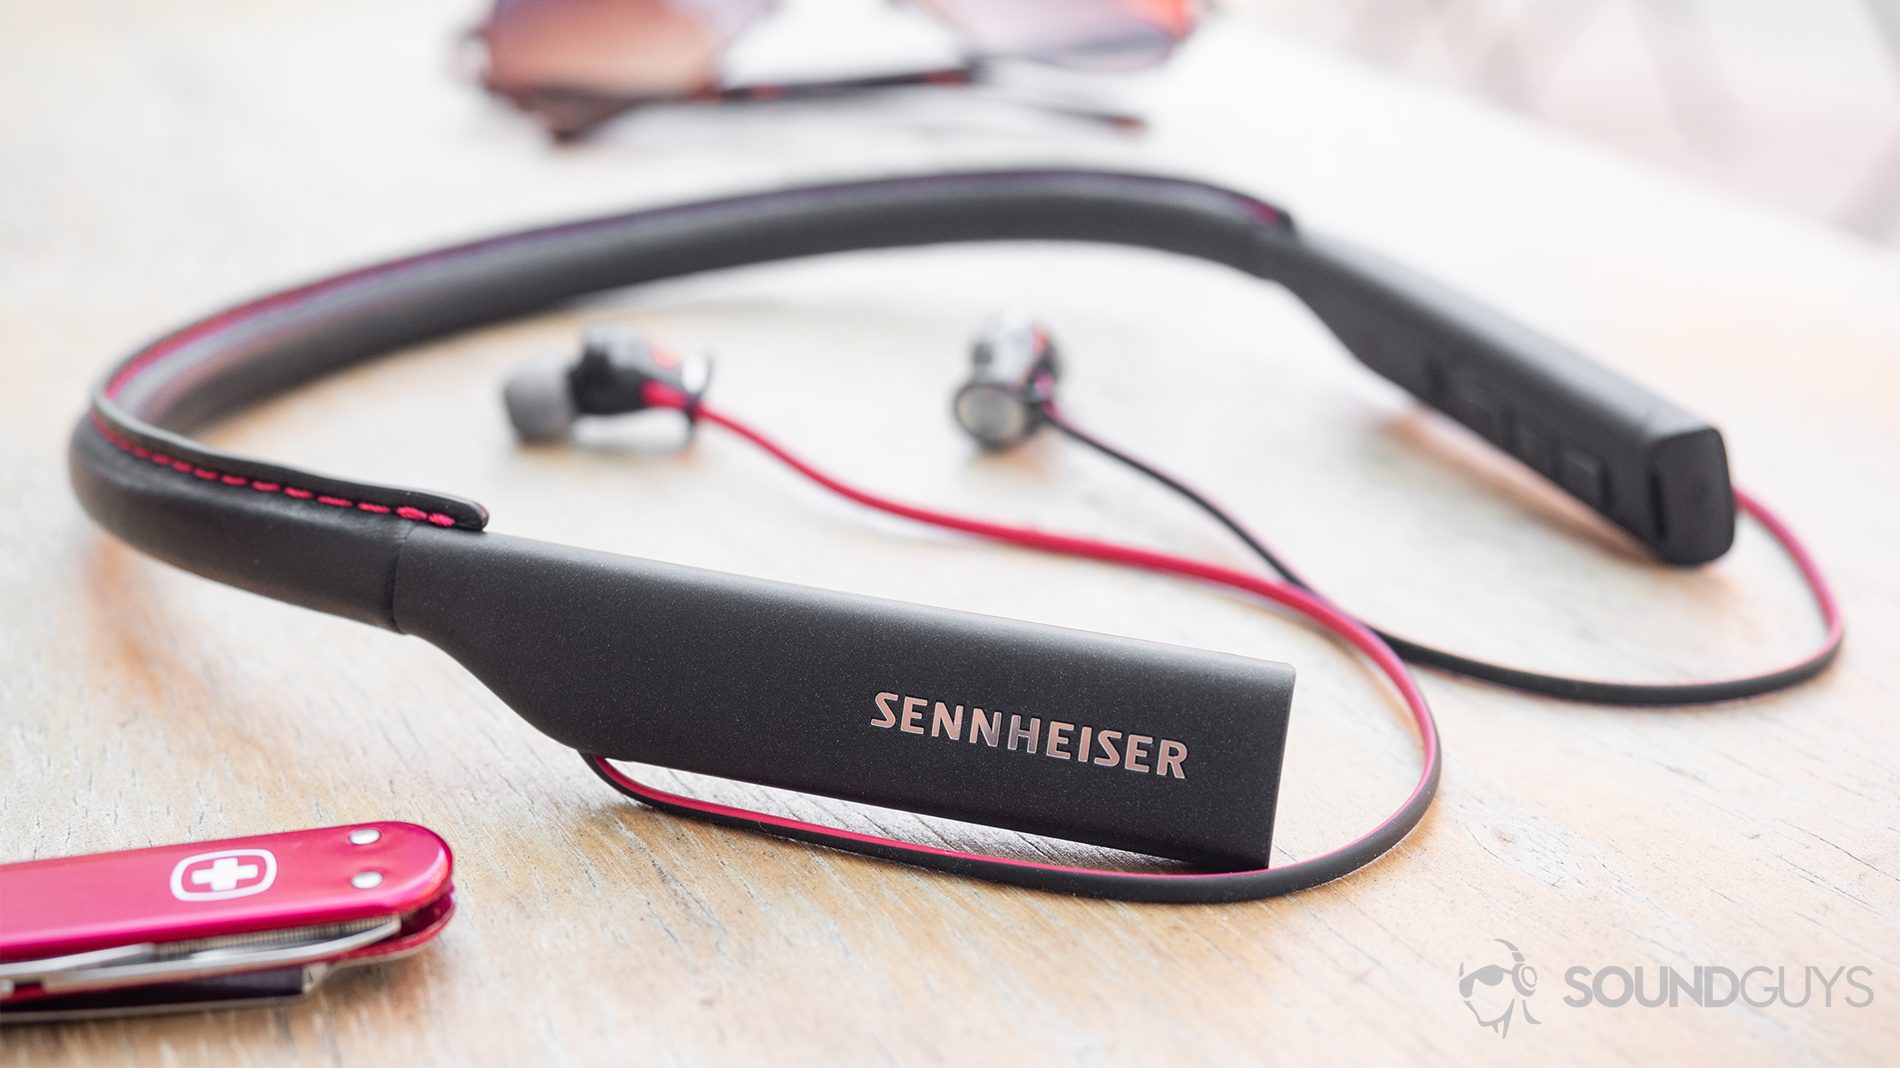 Sennheiser HD1 In-Ear Wireless earbuds on a wood table with sunglasses in the background and a Swiss Army knife in the foreground.